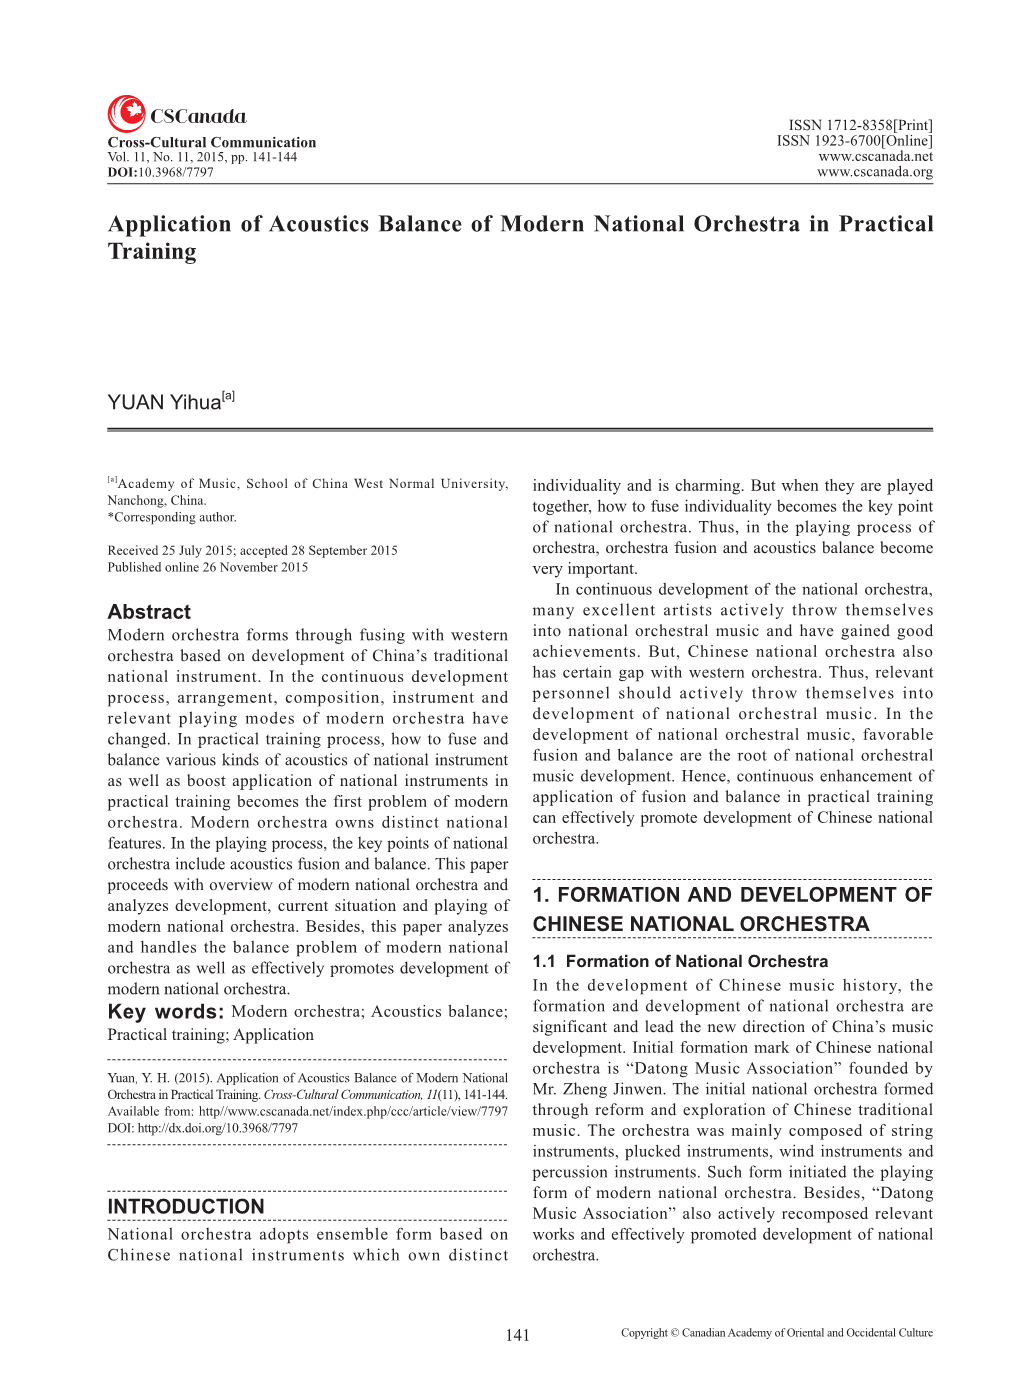 Application of Acoustics Balance of Modern National Orchestra in Practical Training